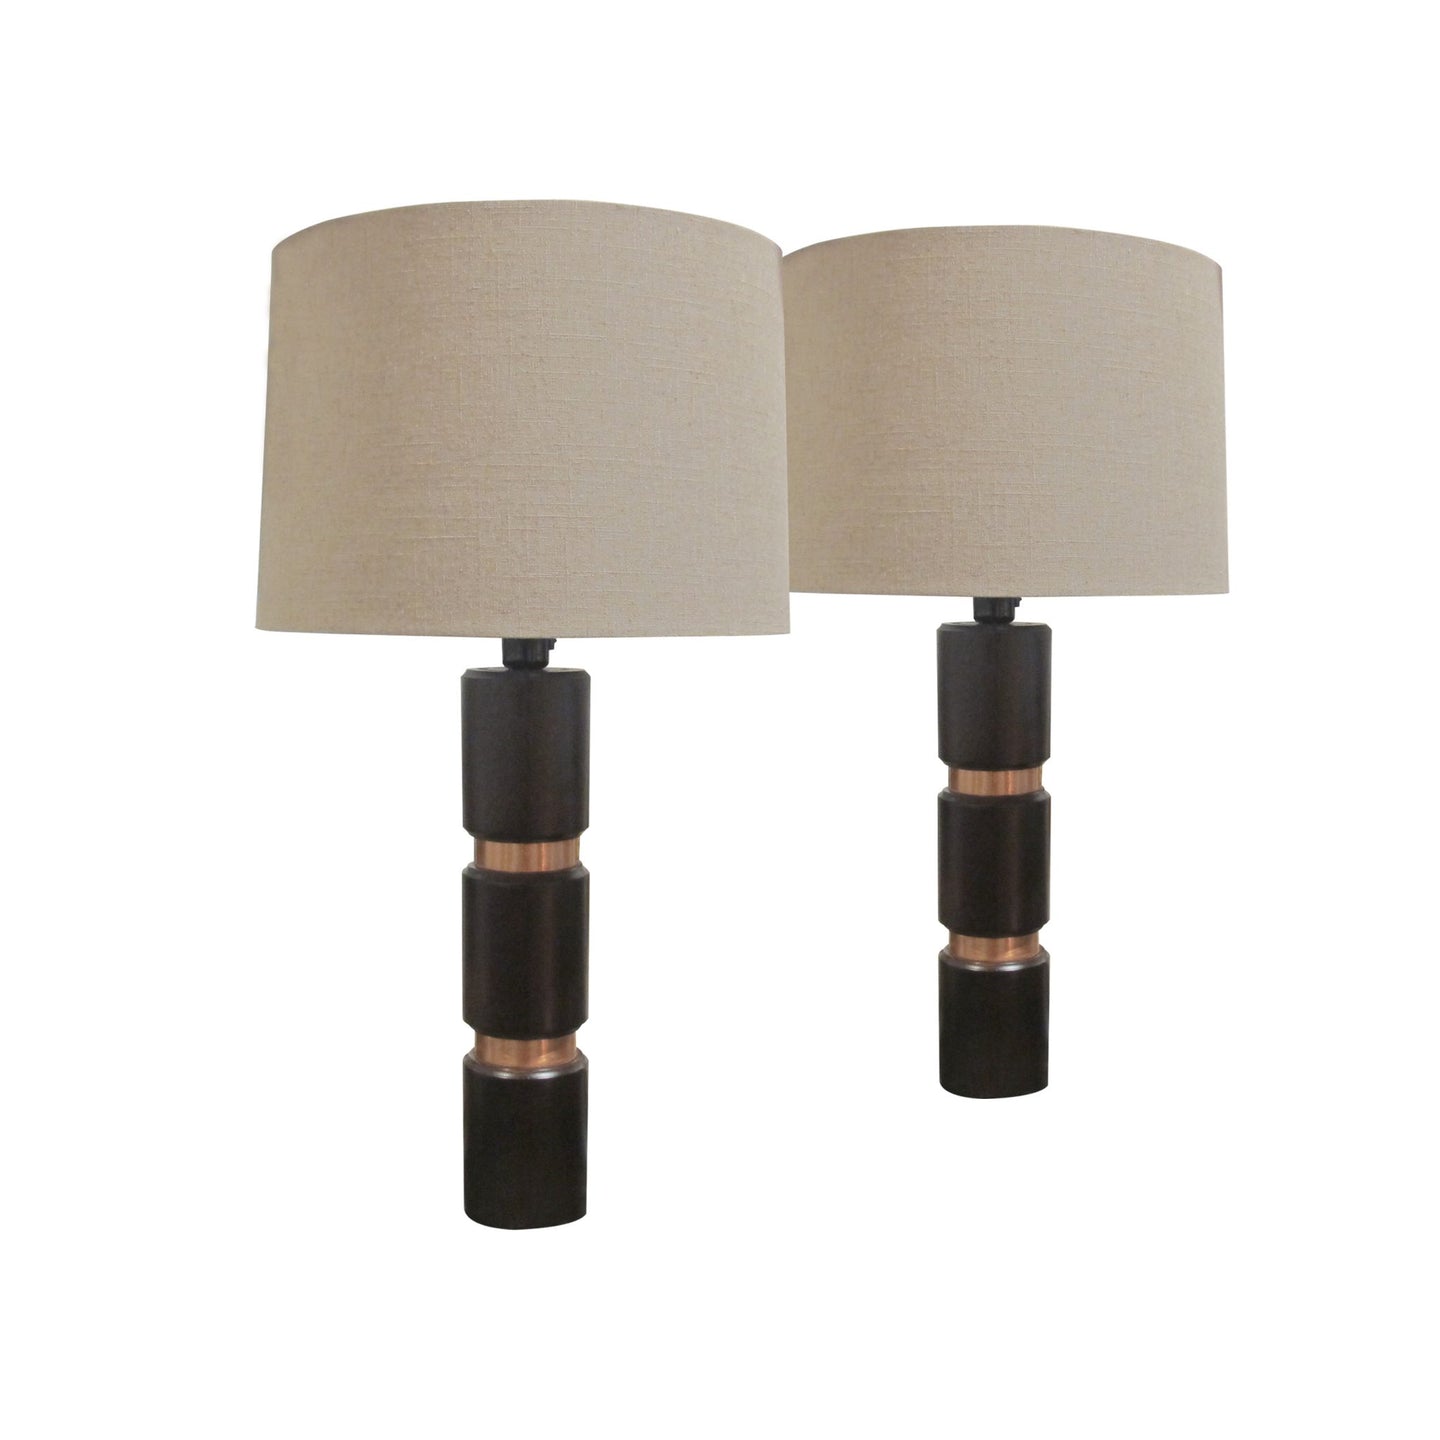 Pair of Scandinavian cylinder table lamps, mid century